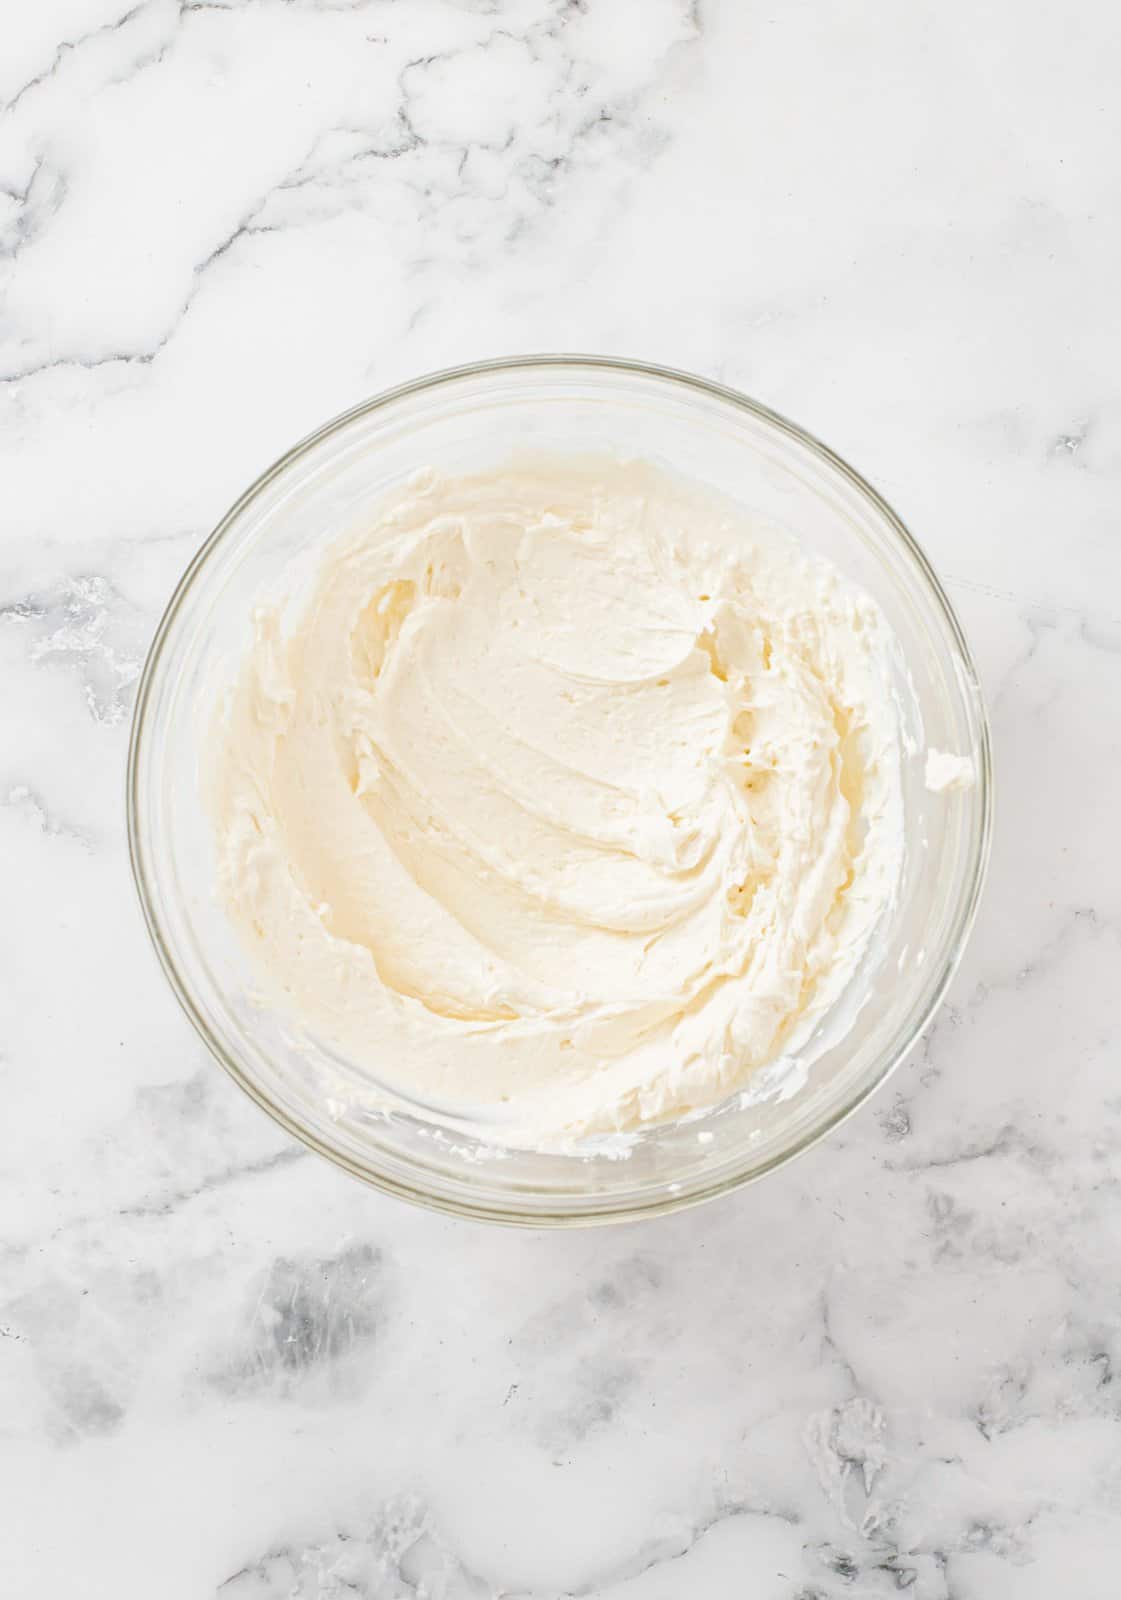 Cream cheese frosting in bowl.